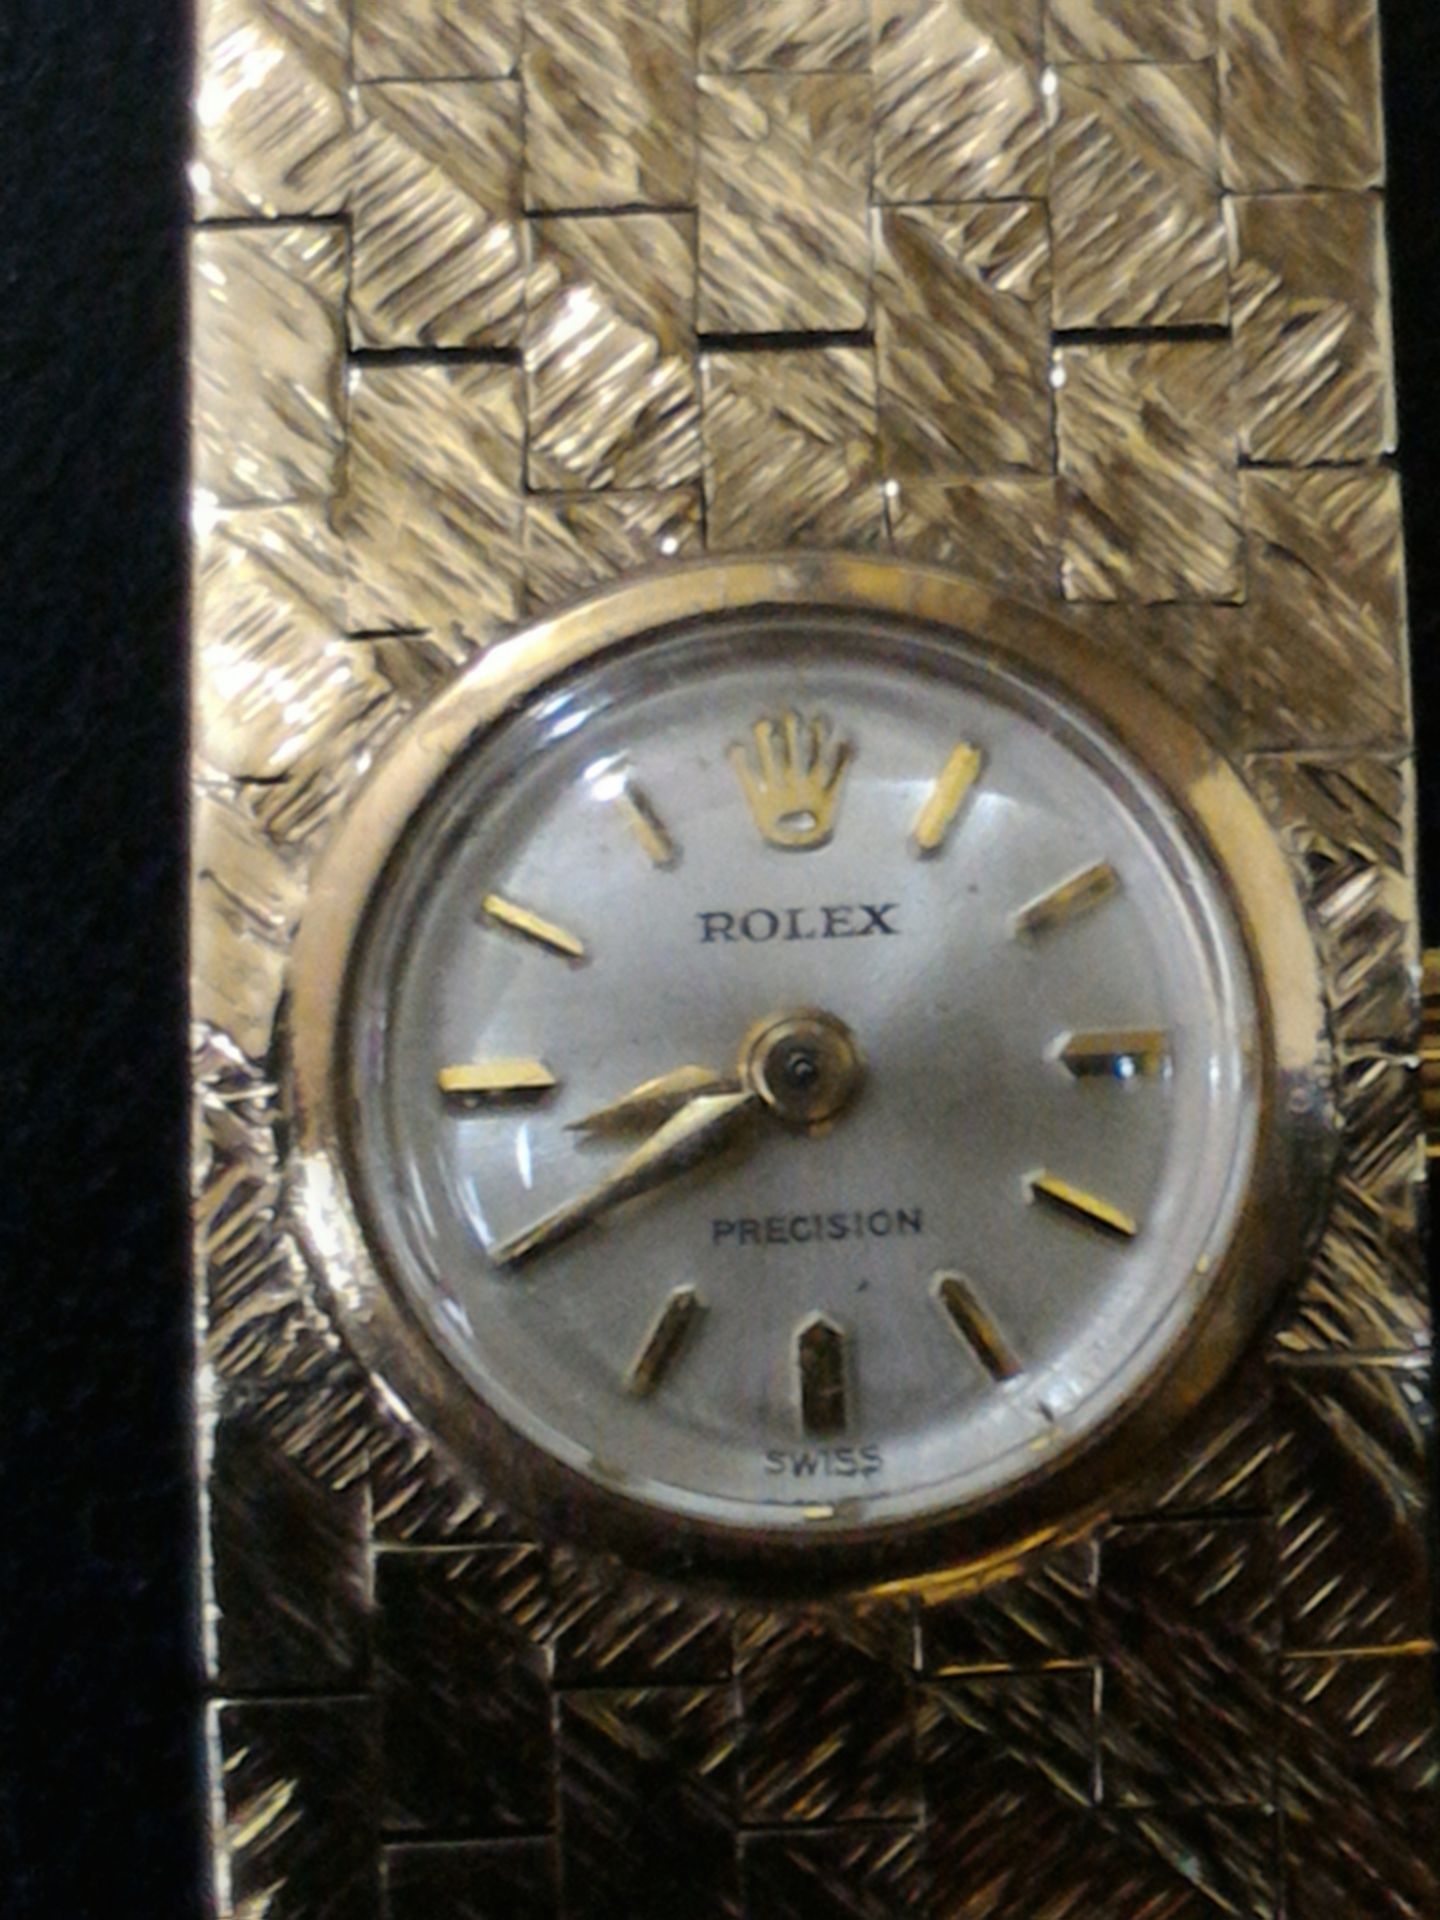 Very rare Vintage 9 ct gold Rolex precision ladies watch with 9 ct gold strap